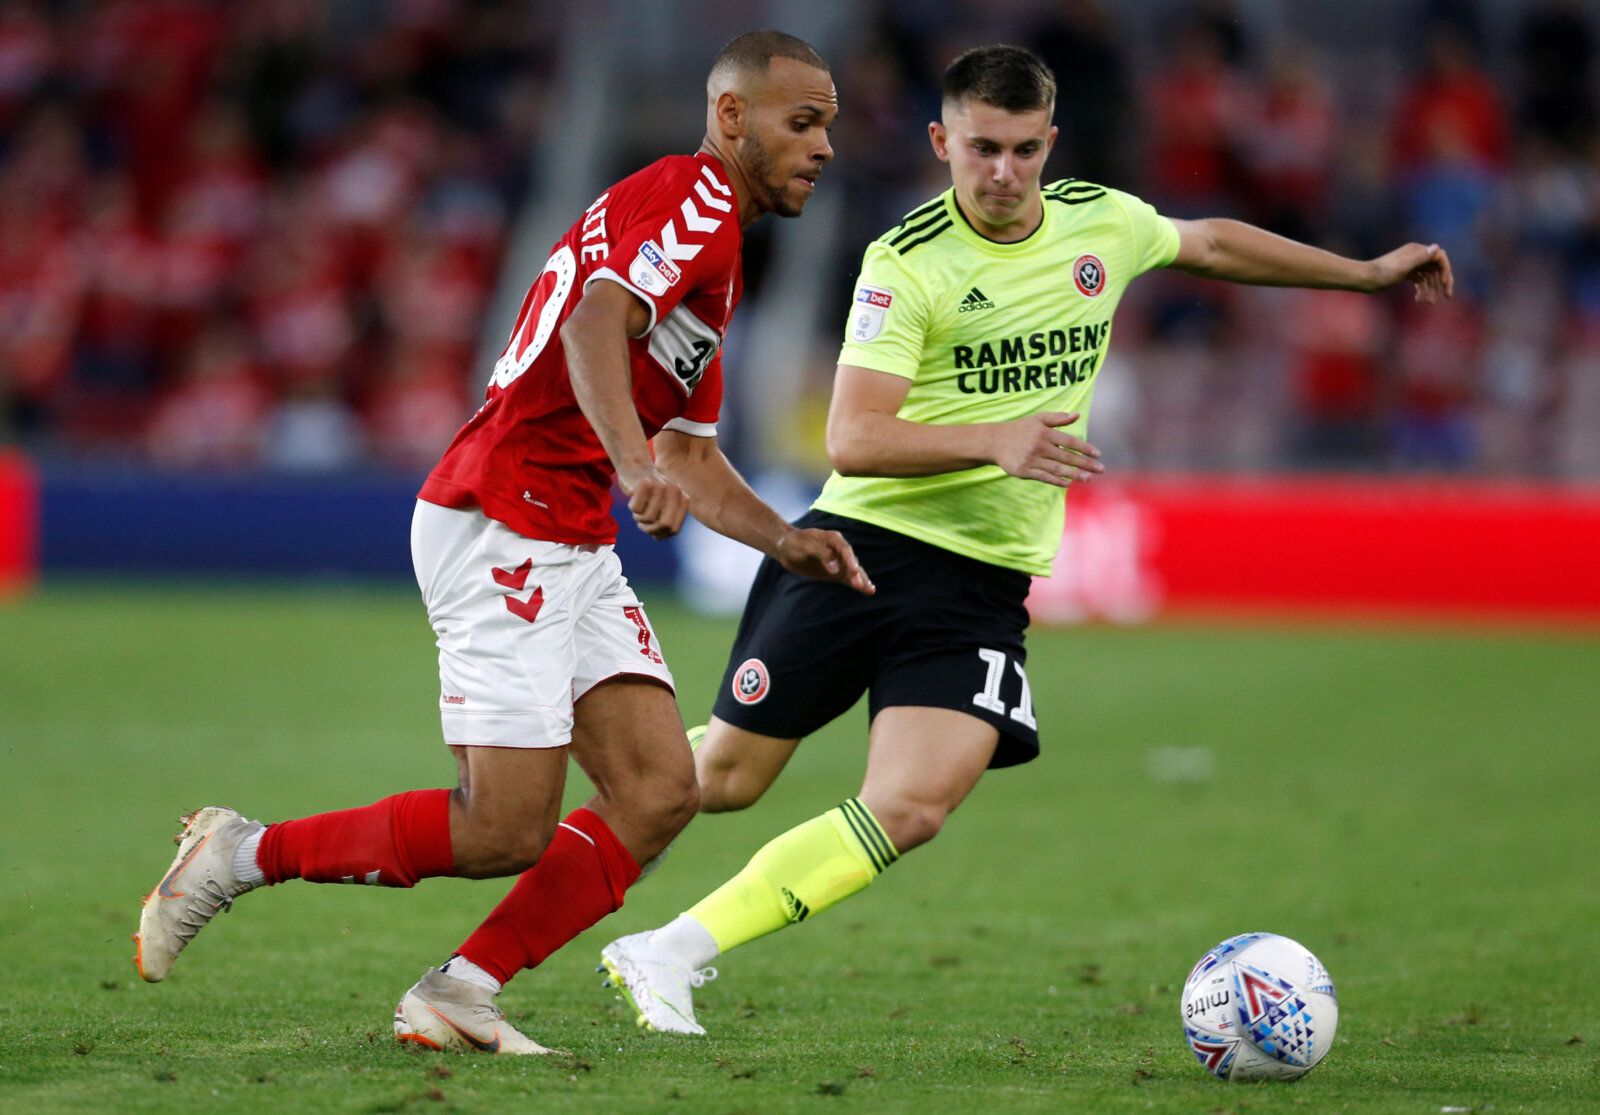 Soccer Football - Championship - Middlesbrough v Sheffield United - Riverside Stadium, Middlesbrough, Britain - August 7, 2018   Middlesbrough's Martin Braithwaite in action with Sheffield United's Ben Woodburn    Action Images/Ed Sykes    EDITORIAL USE ONLY. No use with unauthorized audio, video, data, fixture lists, club/league logos or 